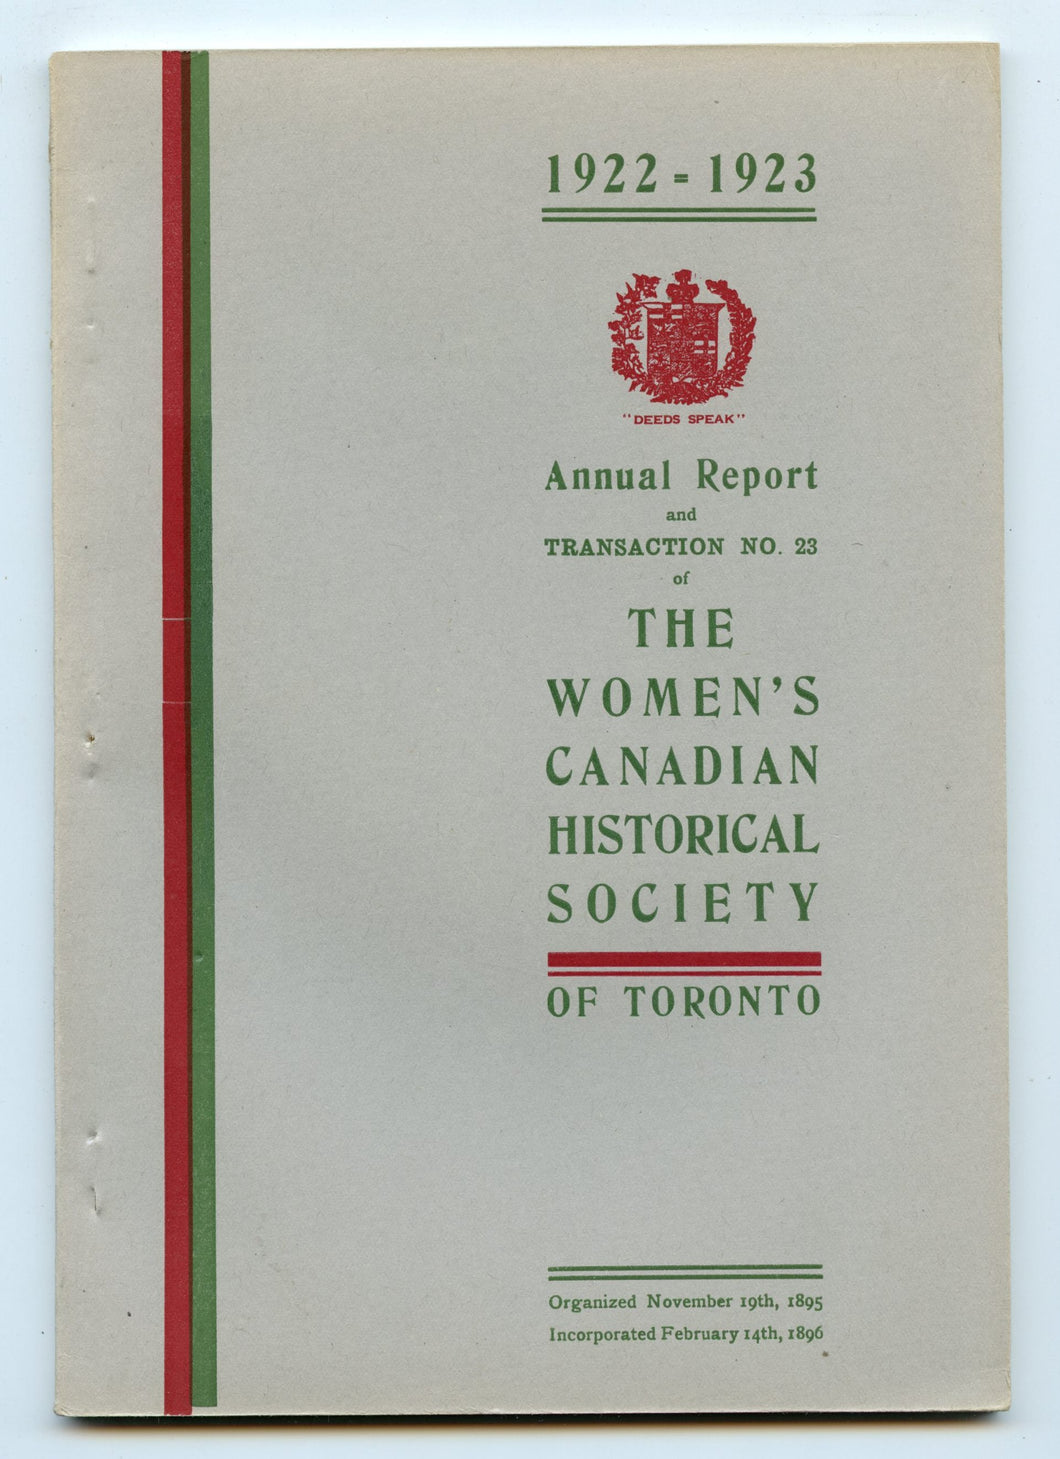 Annual Report and Transaction No. 23 of The Women's Canadian Historical Society of Toronto, 1922-1923